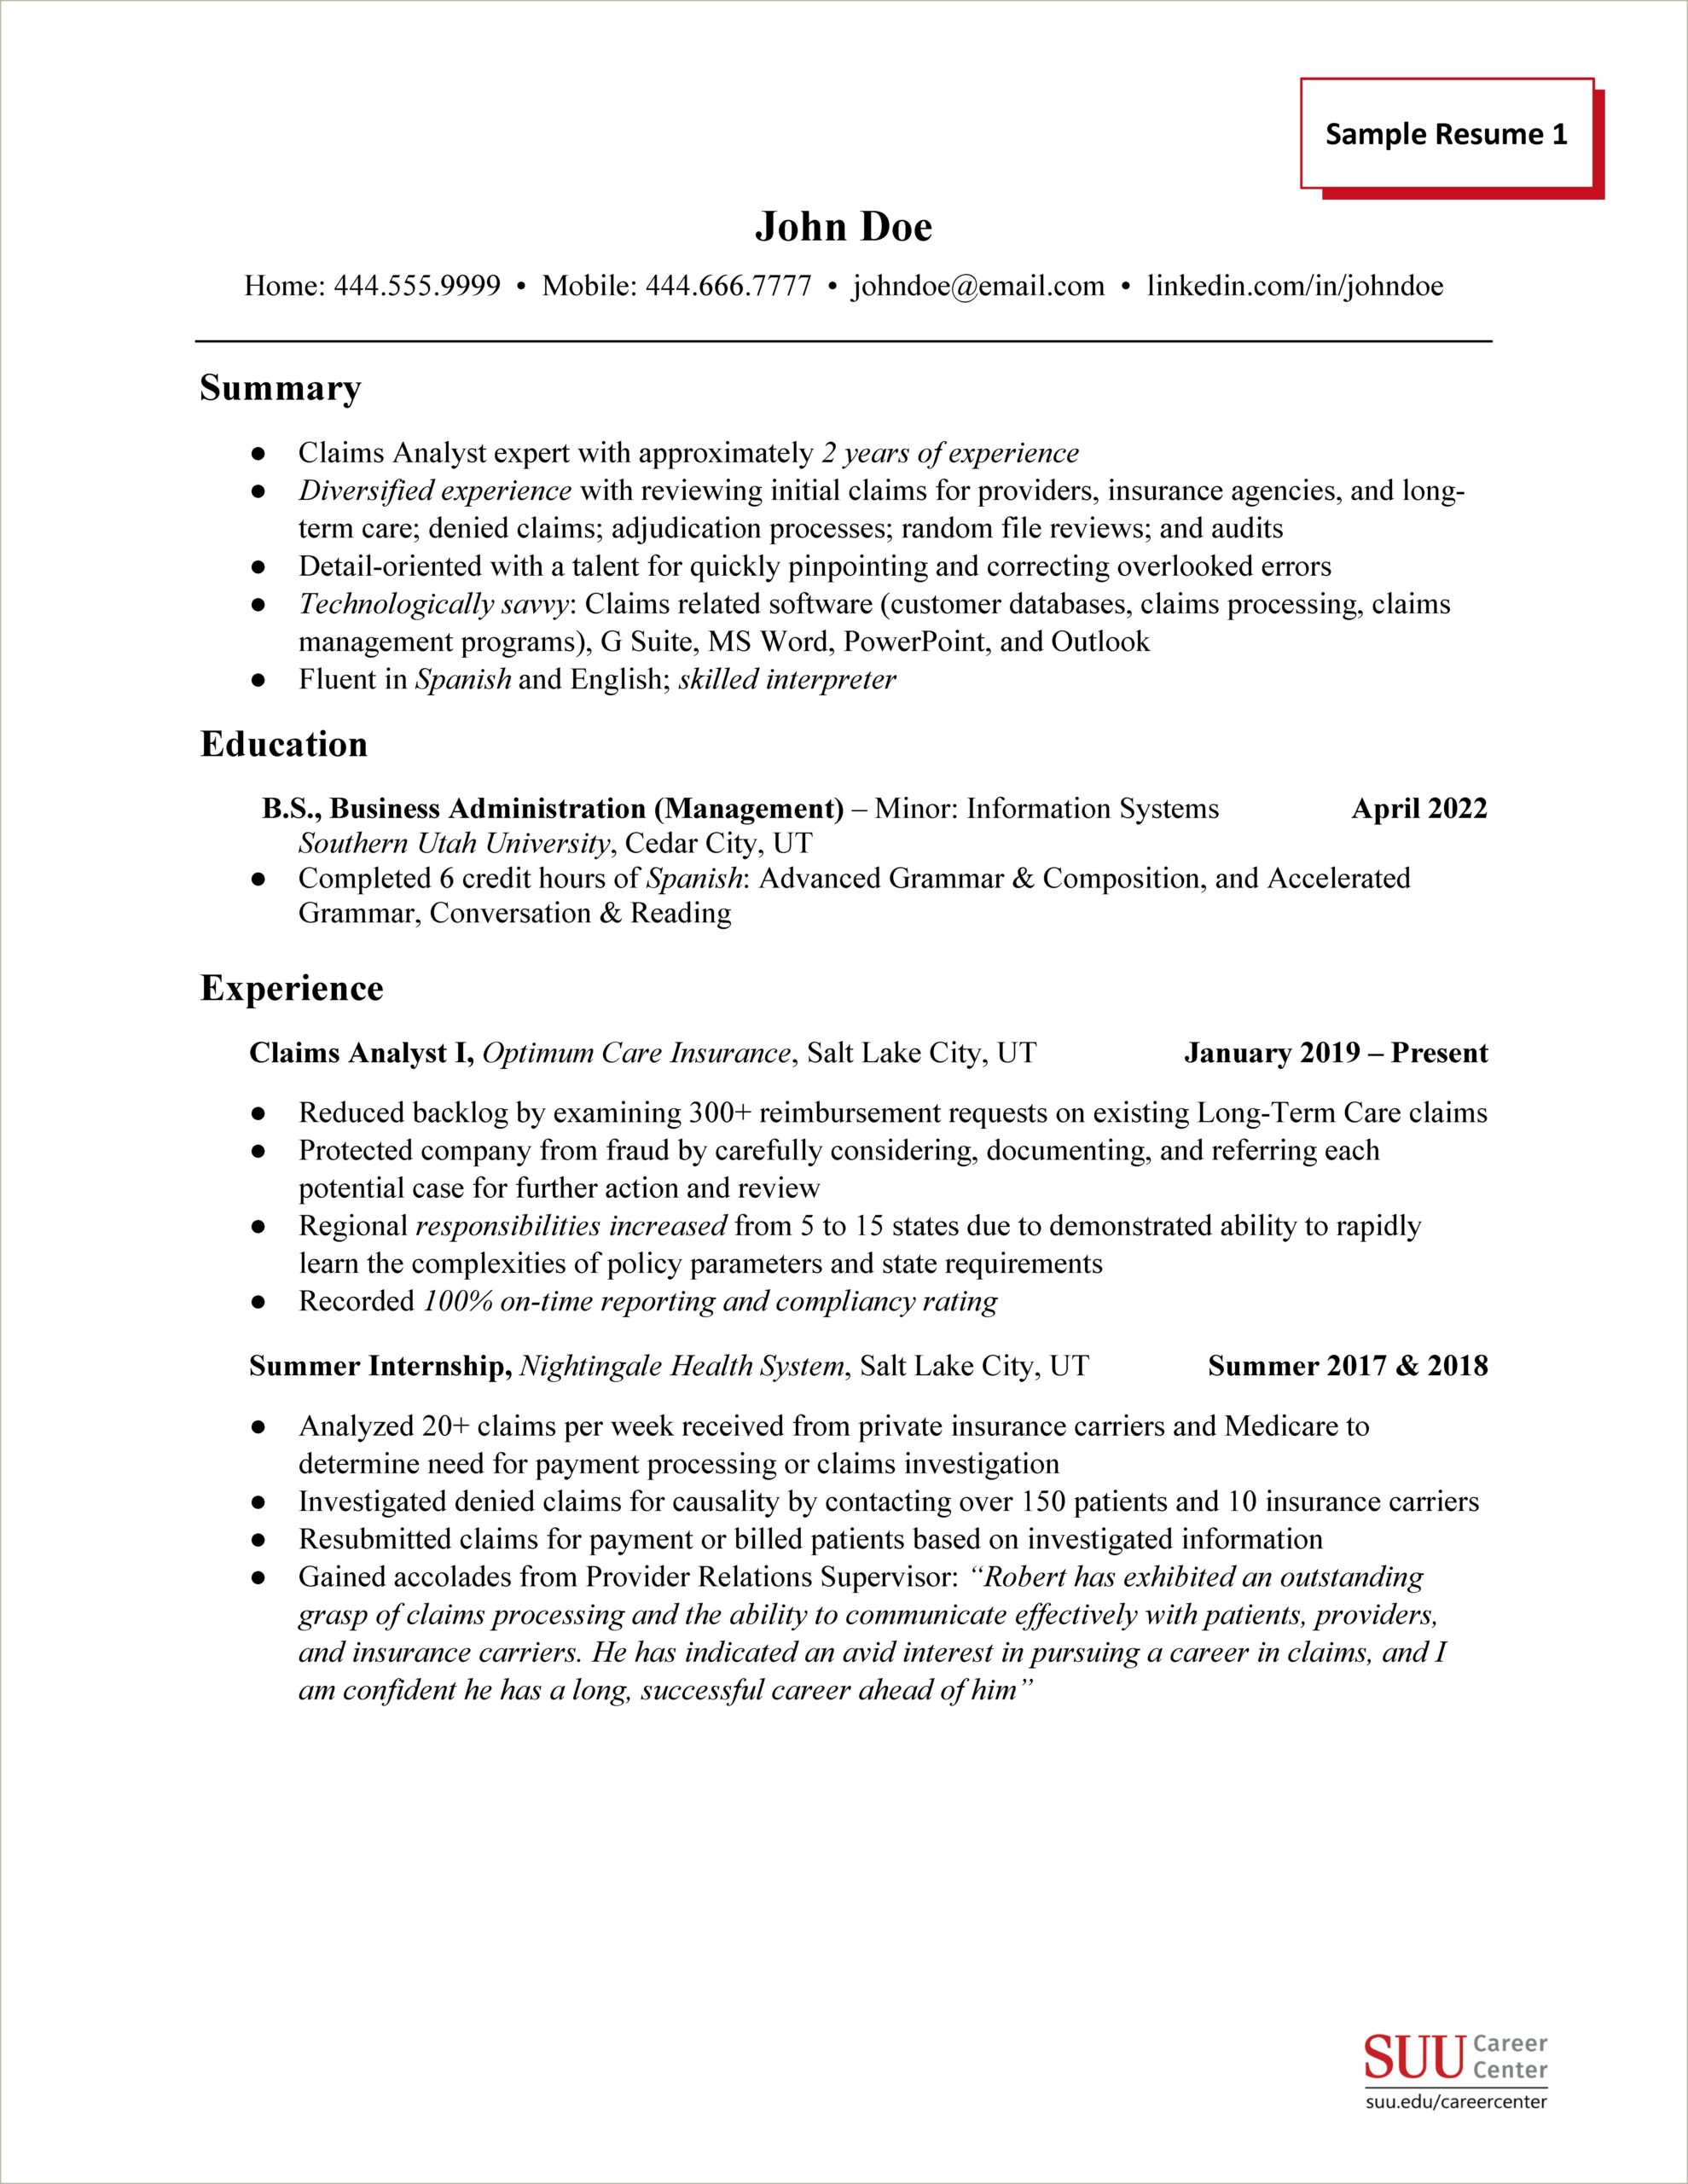 Email Should I Combine Cover Letter And Resume